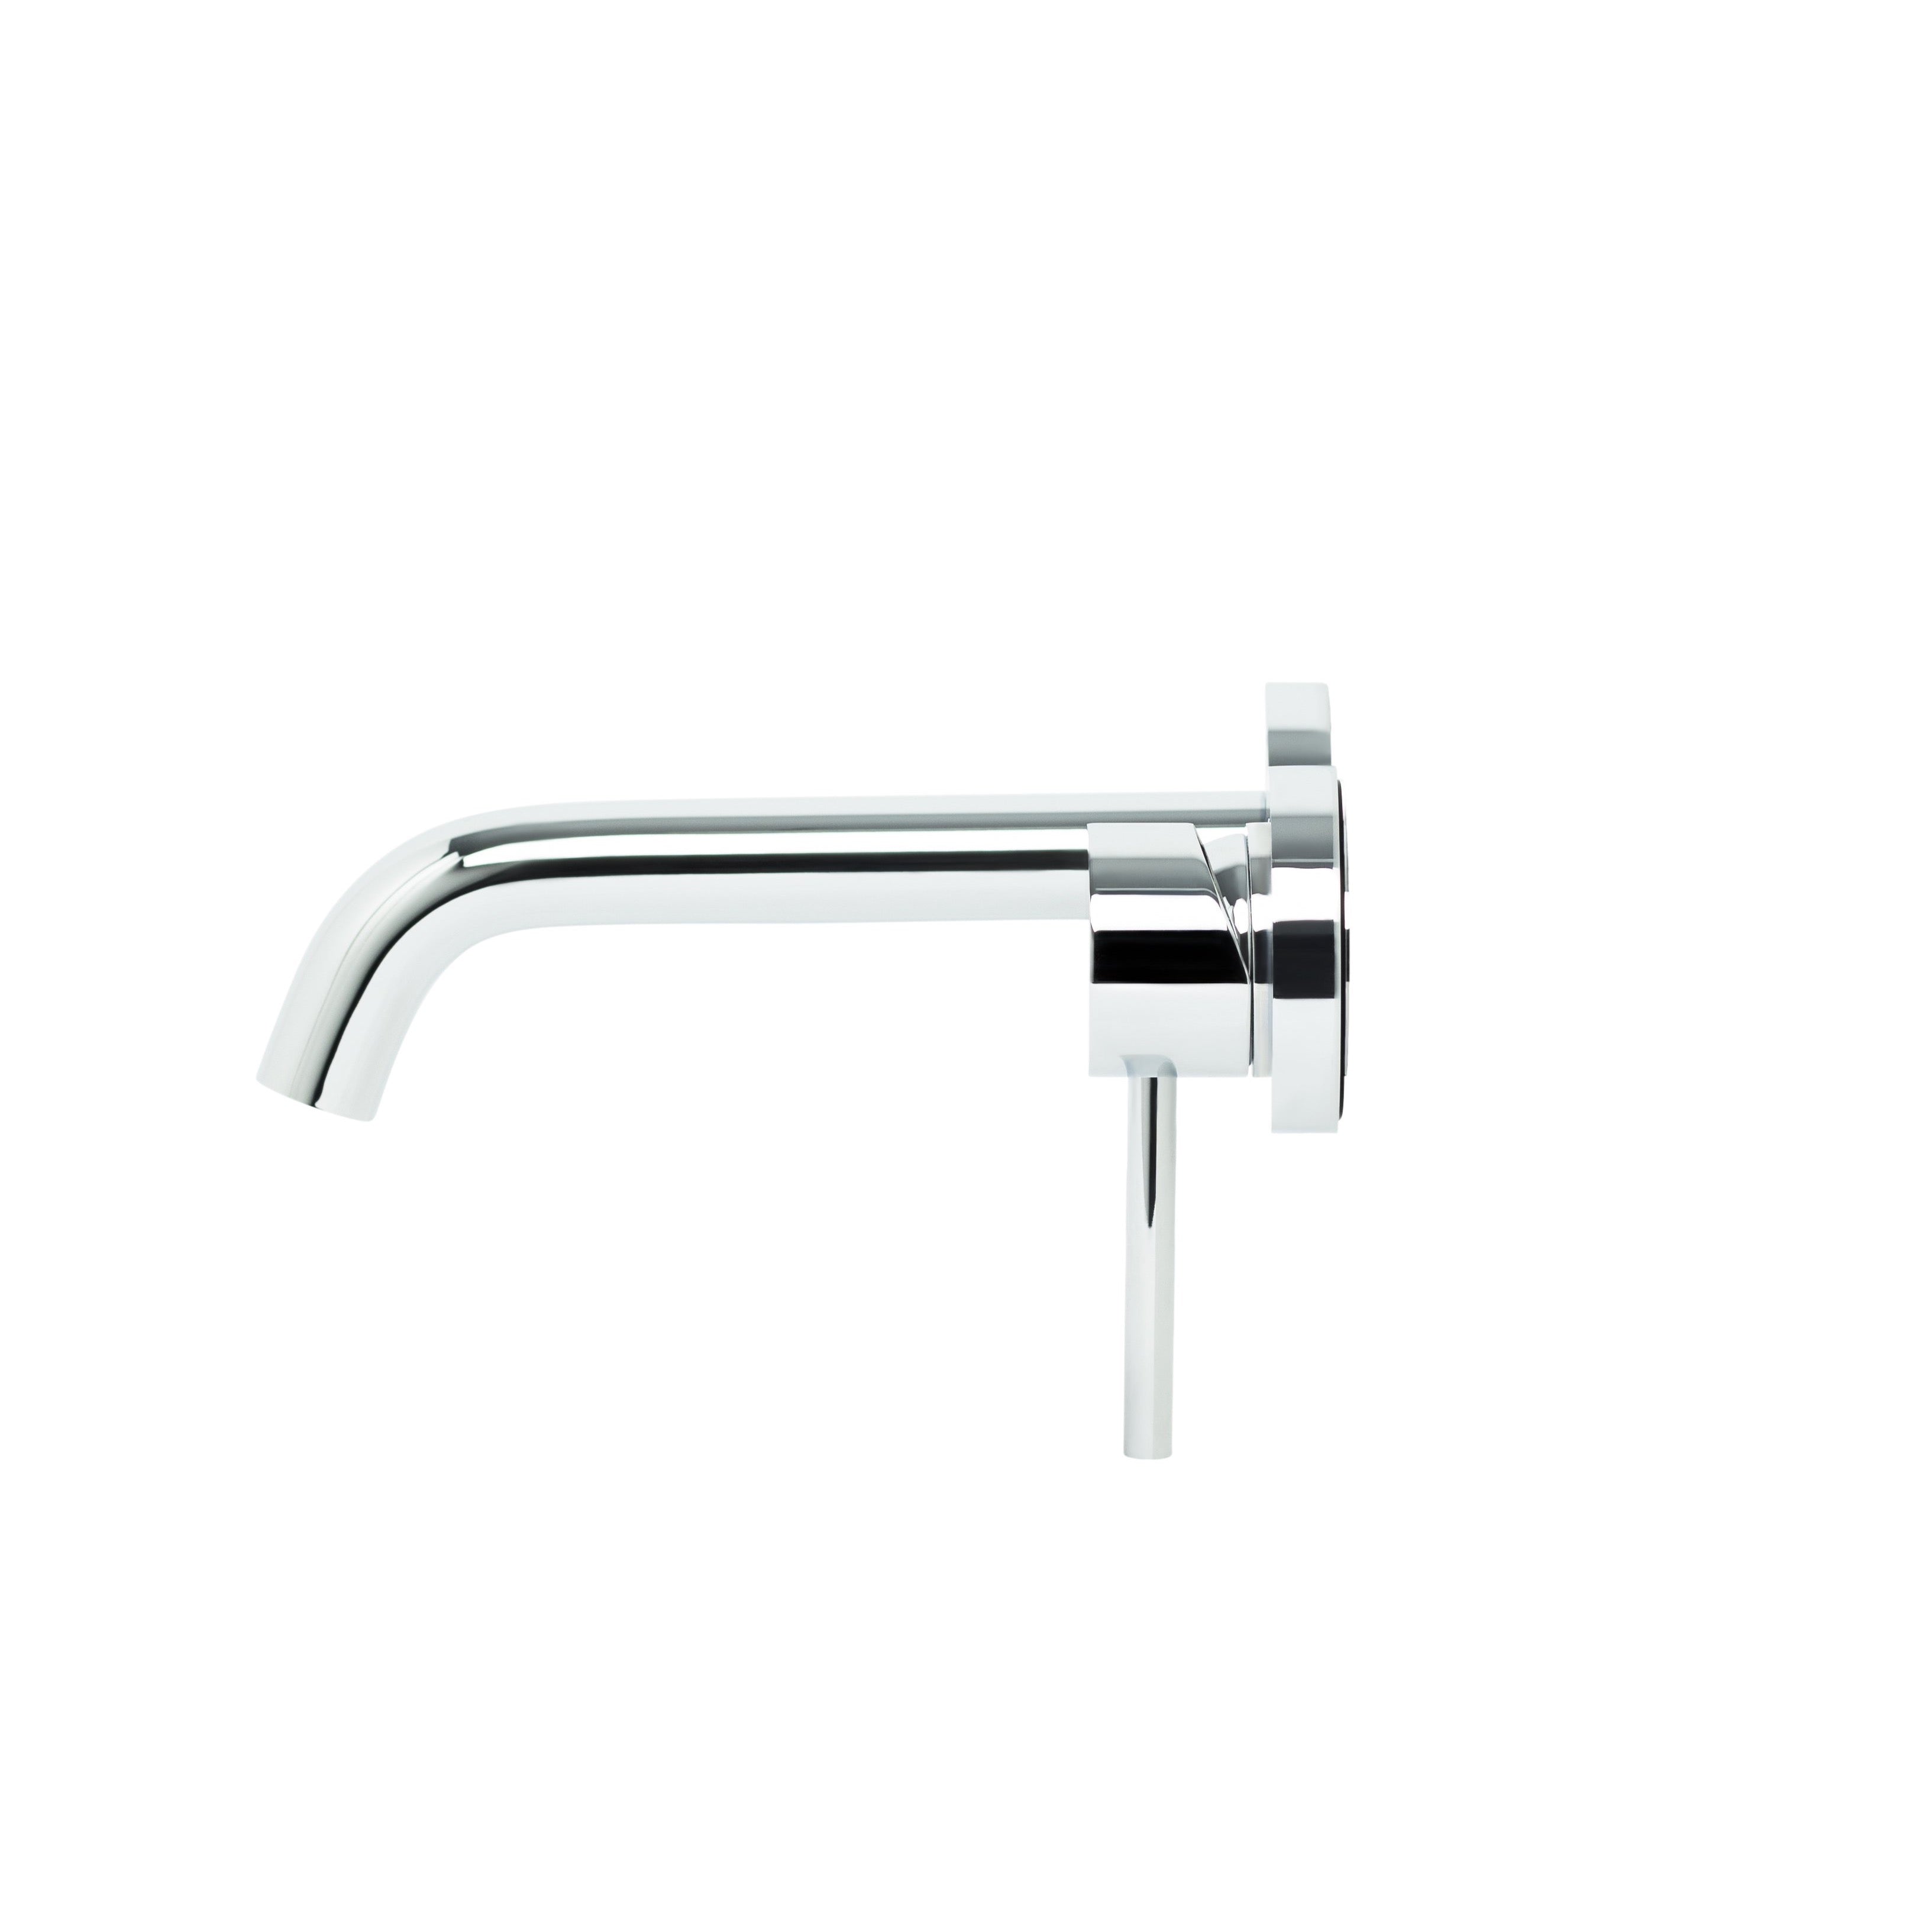 Bondi Pin Lever Wall Mixer Set with Curved Spout in Chrome